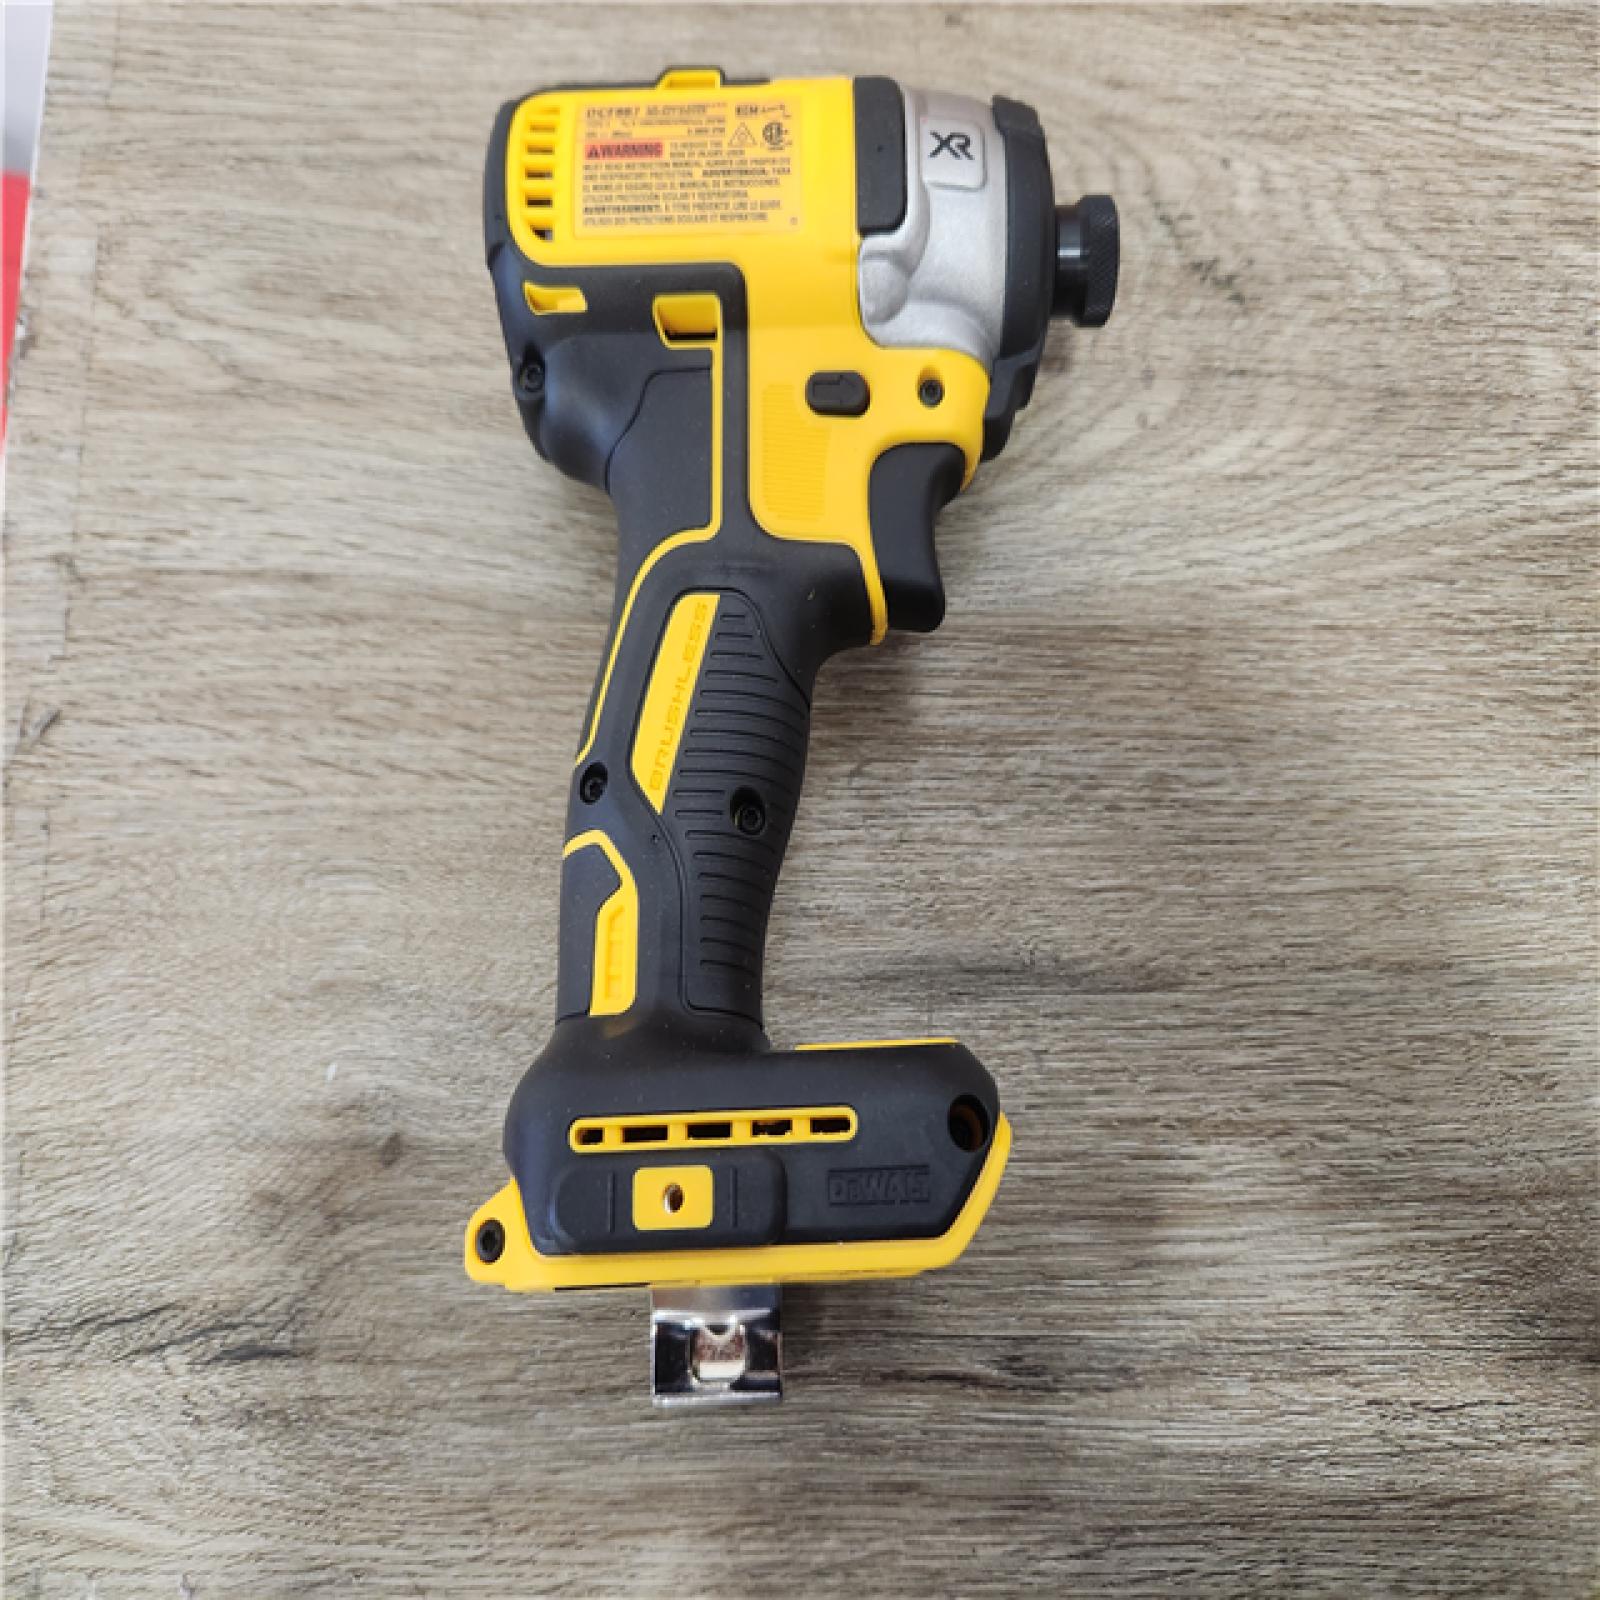 Phoenix Location NEW DEWALT 20V MAX XR Lithium-Ion Cordless Brushless 1/4 in. Impact Driver (2), Charger, 2.0Ah Battery and 6.0Ah Battery